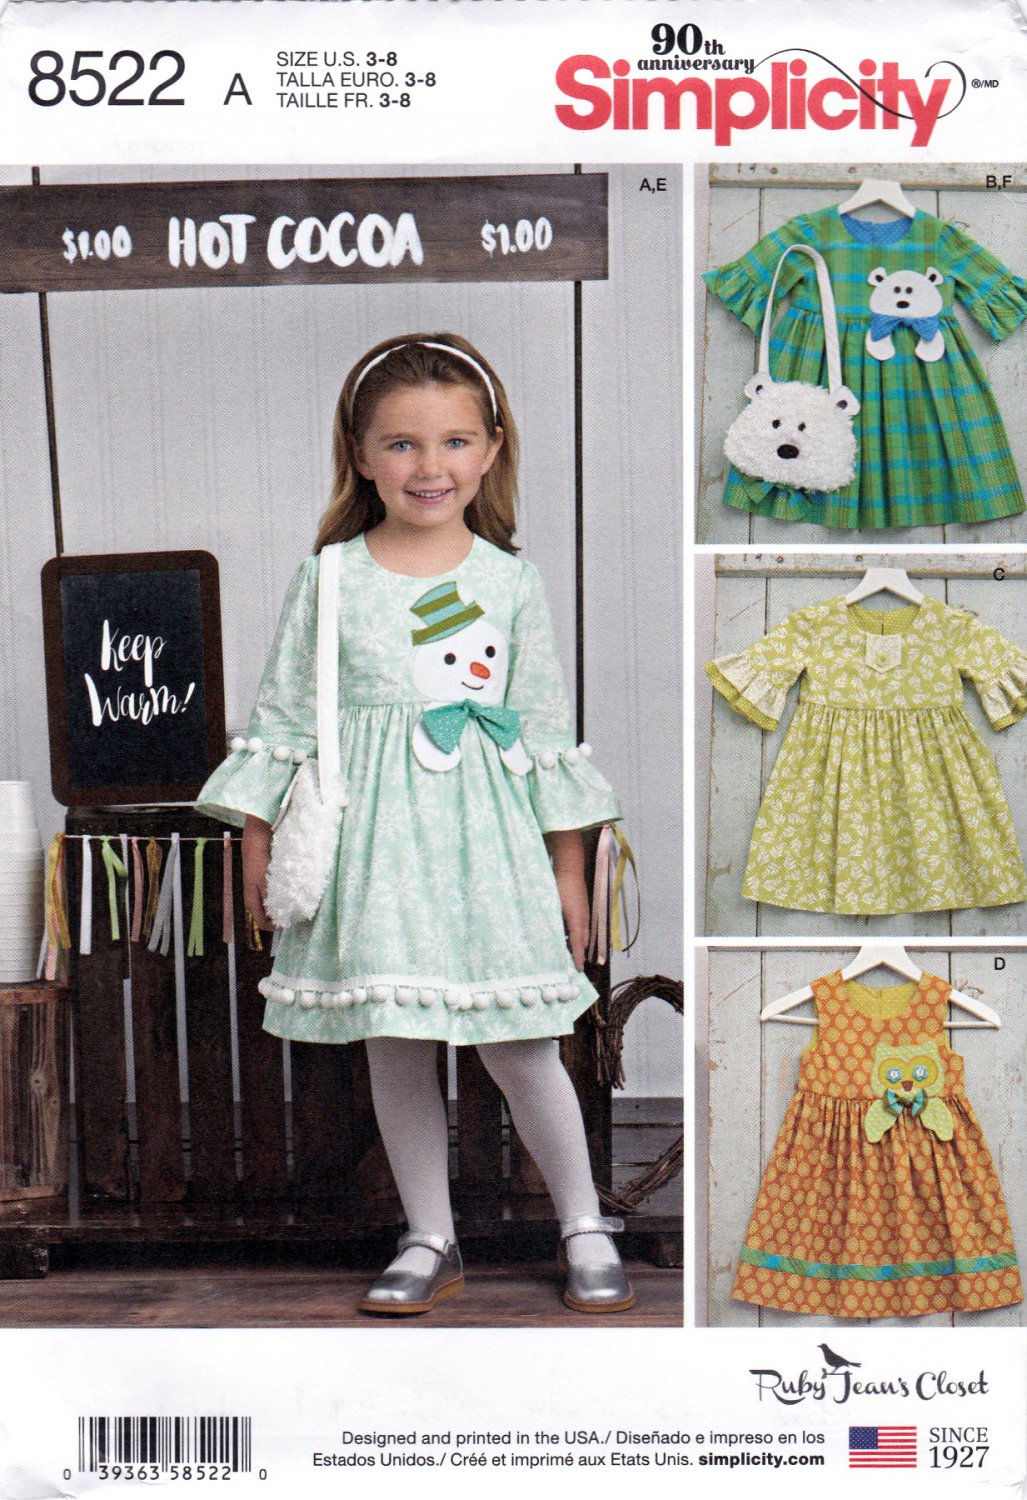 Simplicity 8522 Girls Sewing Pattern Childrens Dresses Purses Ruby Jean Design Kids Sizes 3-8